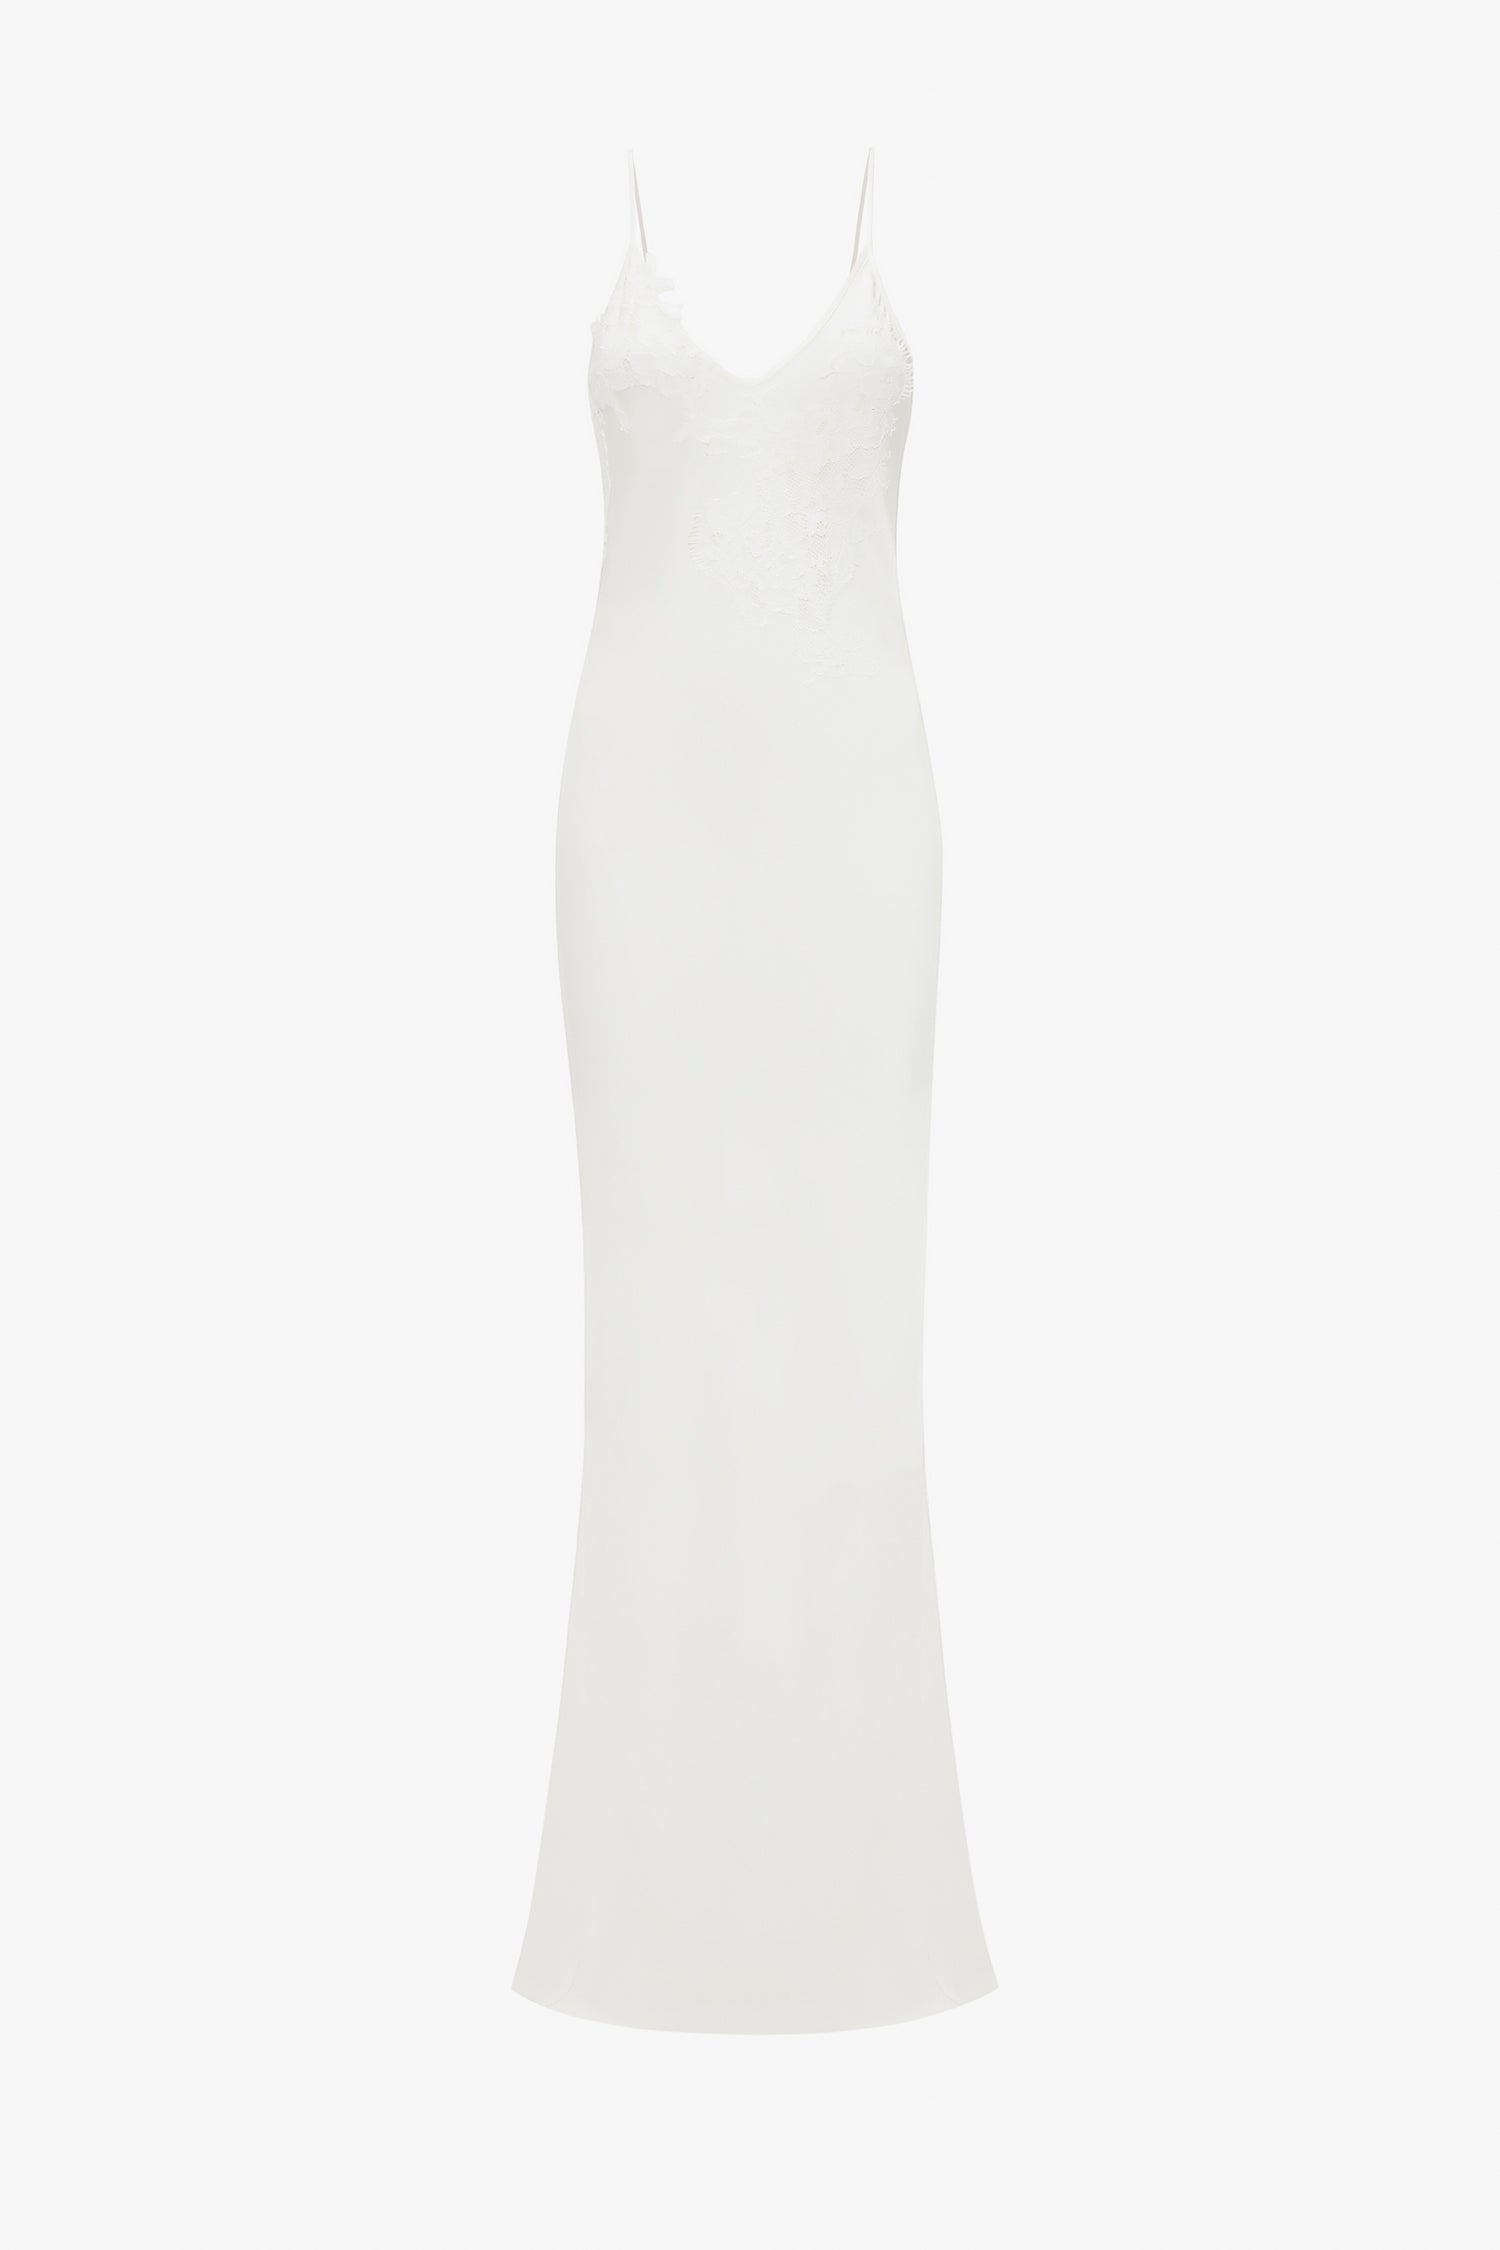 A simple white, sleeveless, slim-fit evening dress with lace detailing on the upper part, displayed against a white background. 
would become:
An Exclusive Lace Detail Floor-Length Cami Dress In Ivory by Victoria Beckham, displayed against a white background.